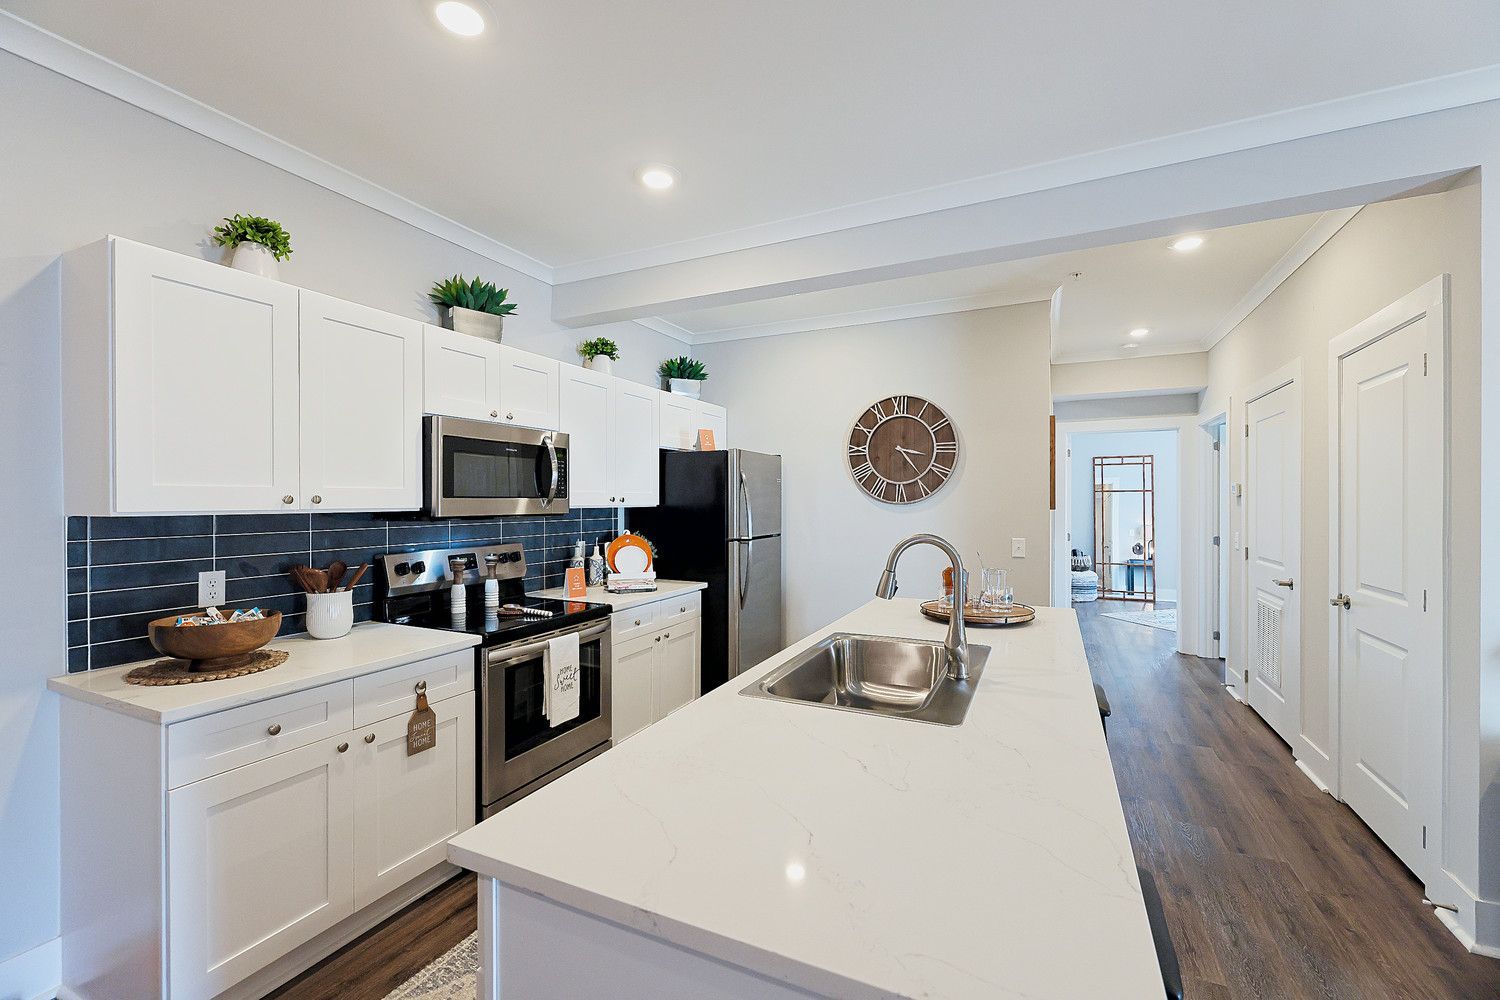 Pointe Grand Kingsland East Apartment Homes designer kitchen with oversized island.